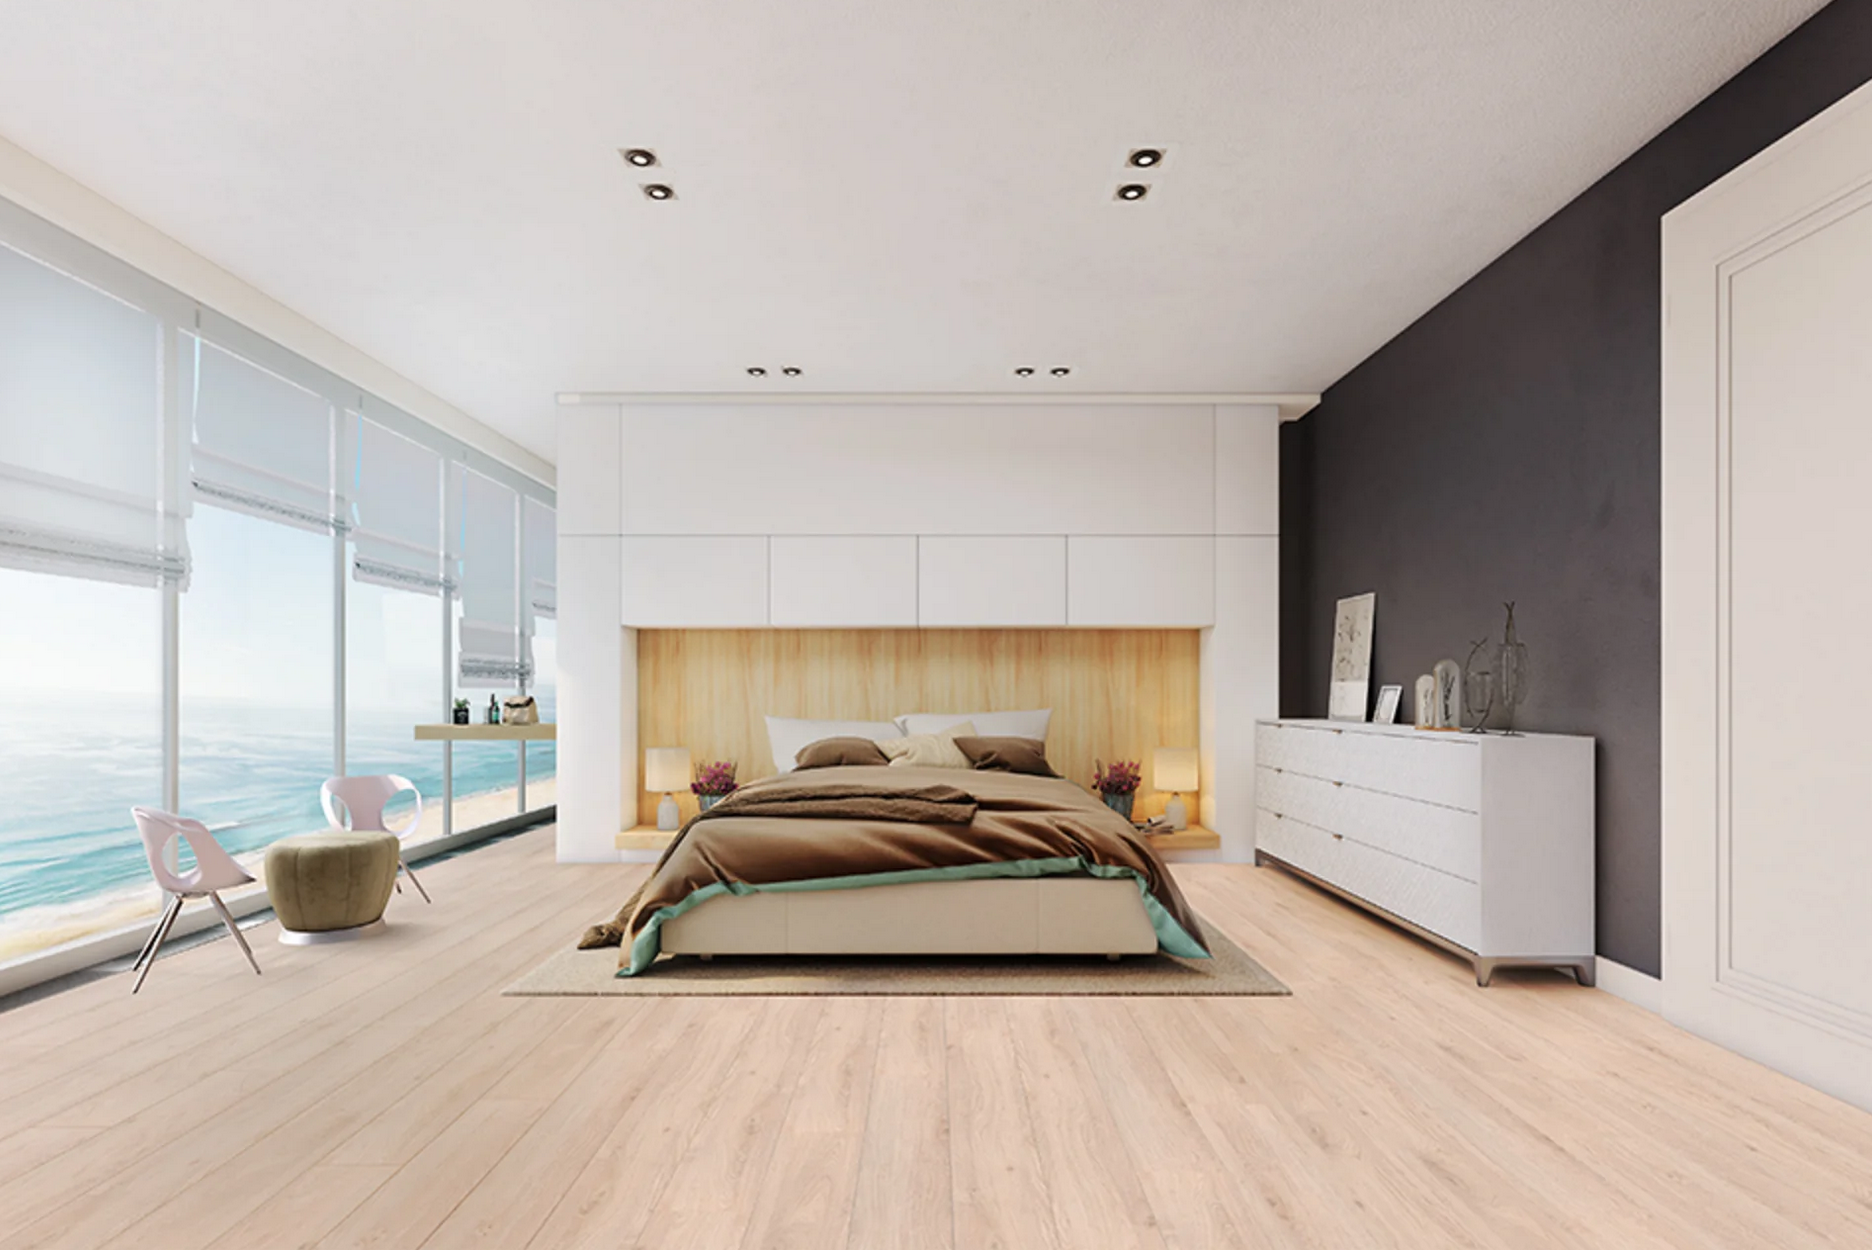 wood flooring for your bedroom - wood and beyond blog